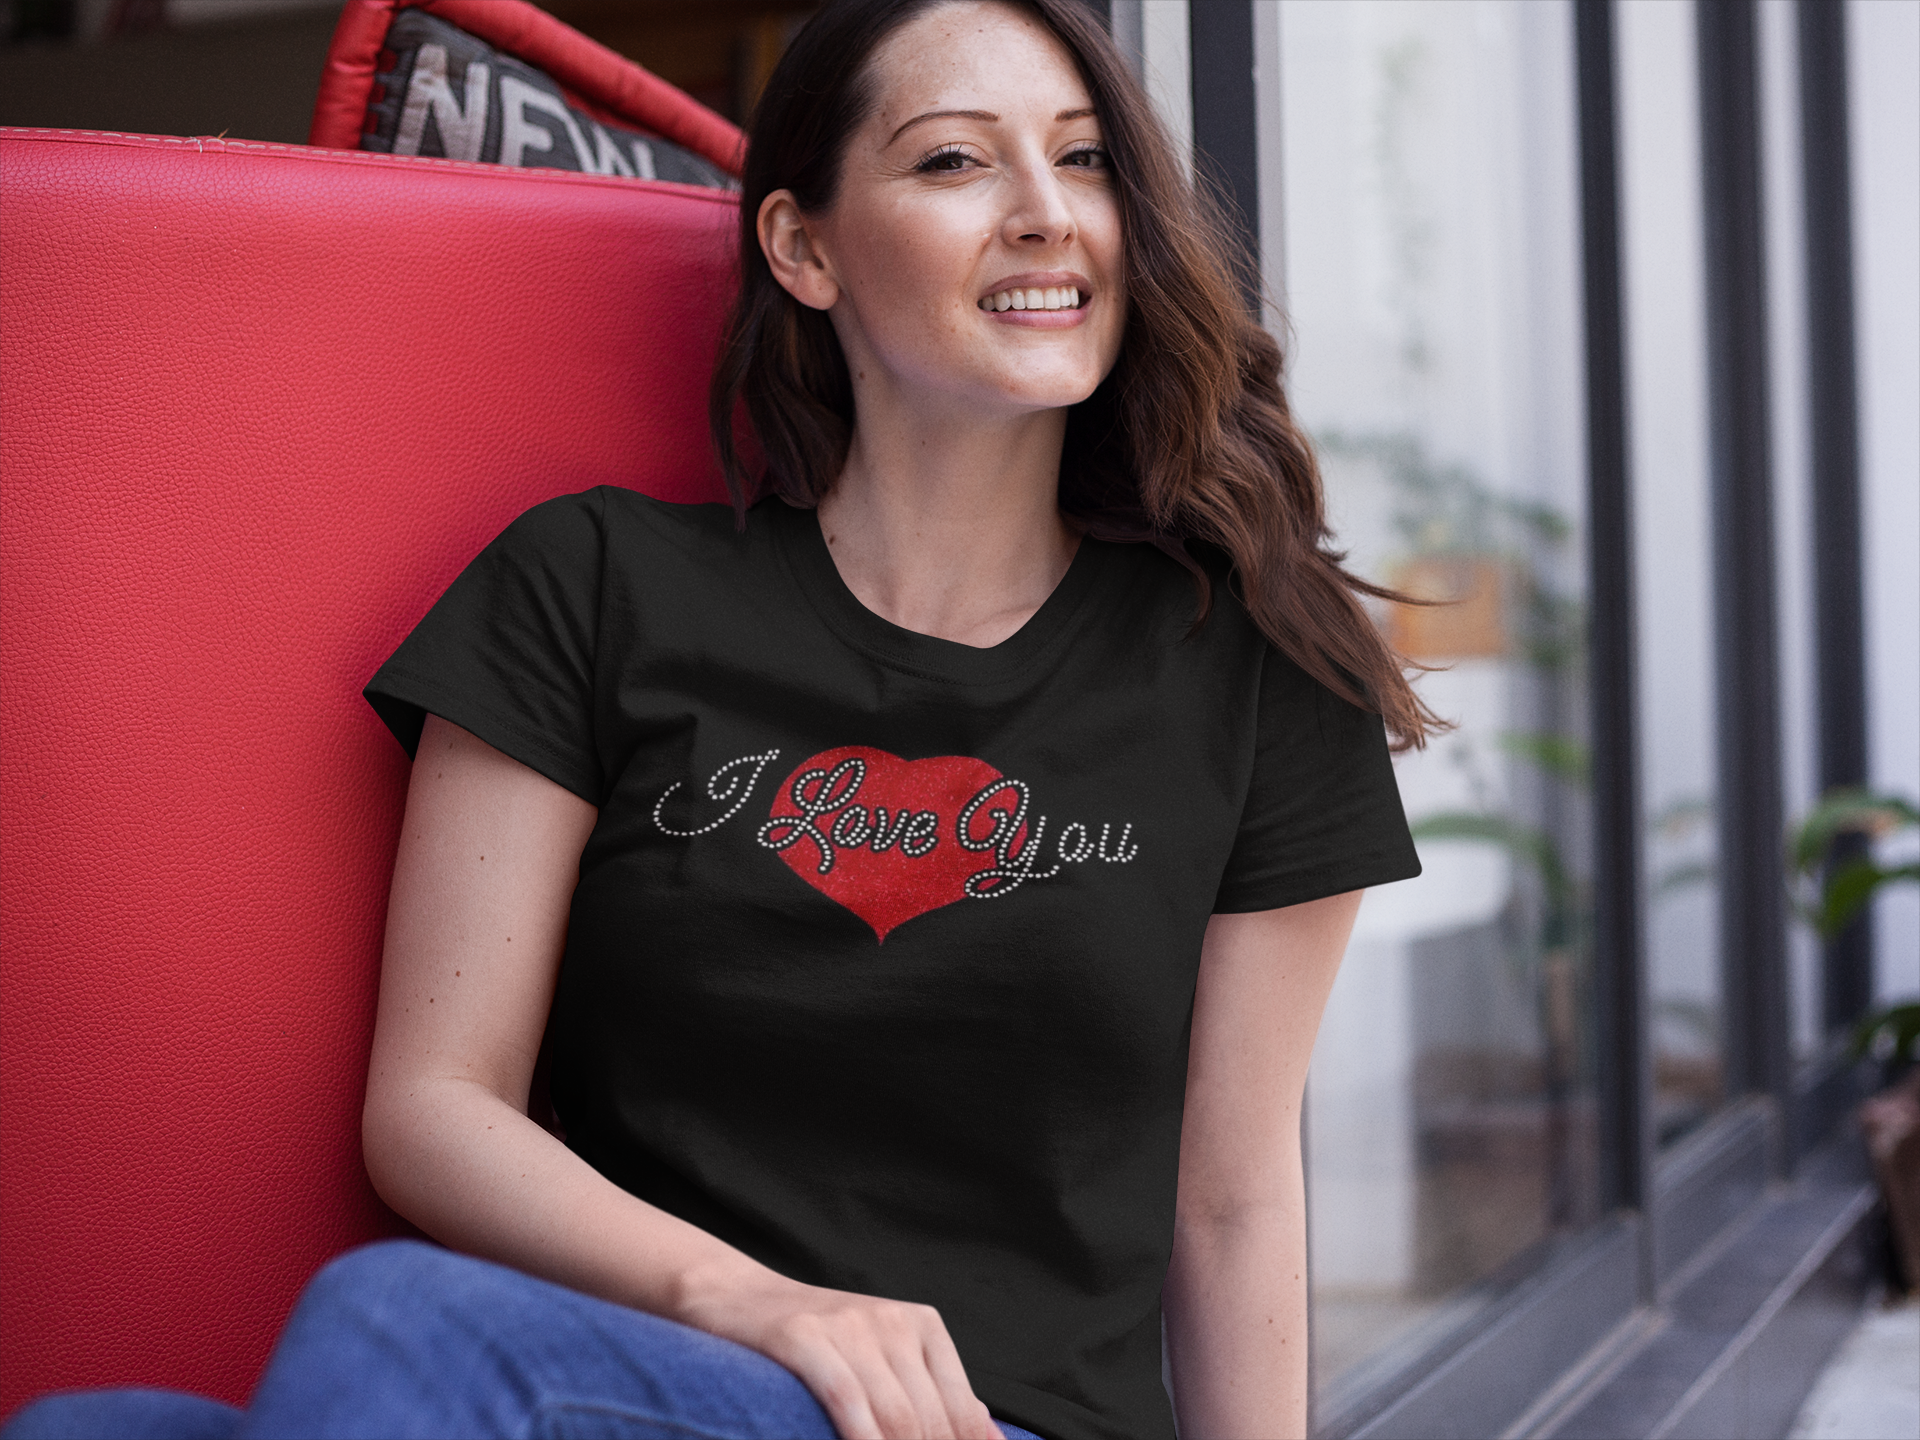 I Love You with Heart T-Shirts